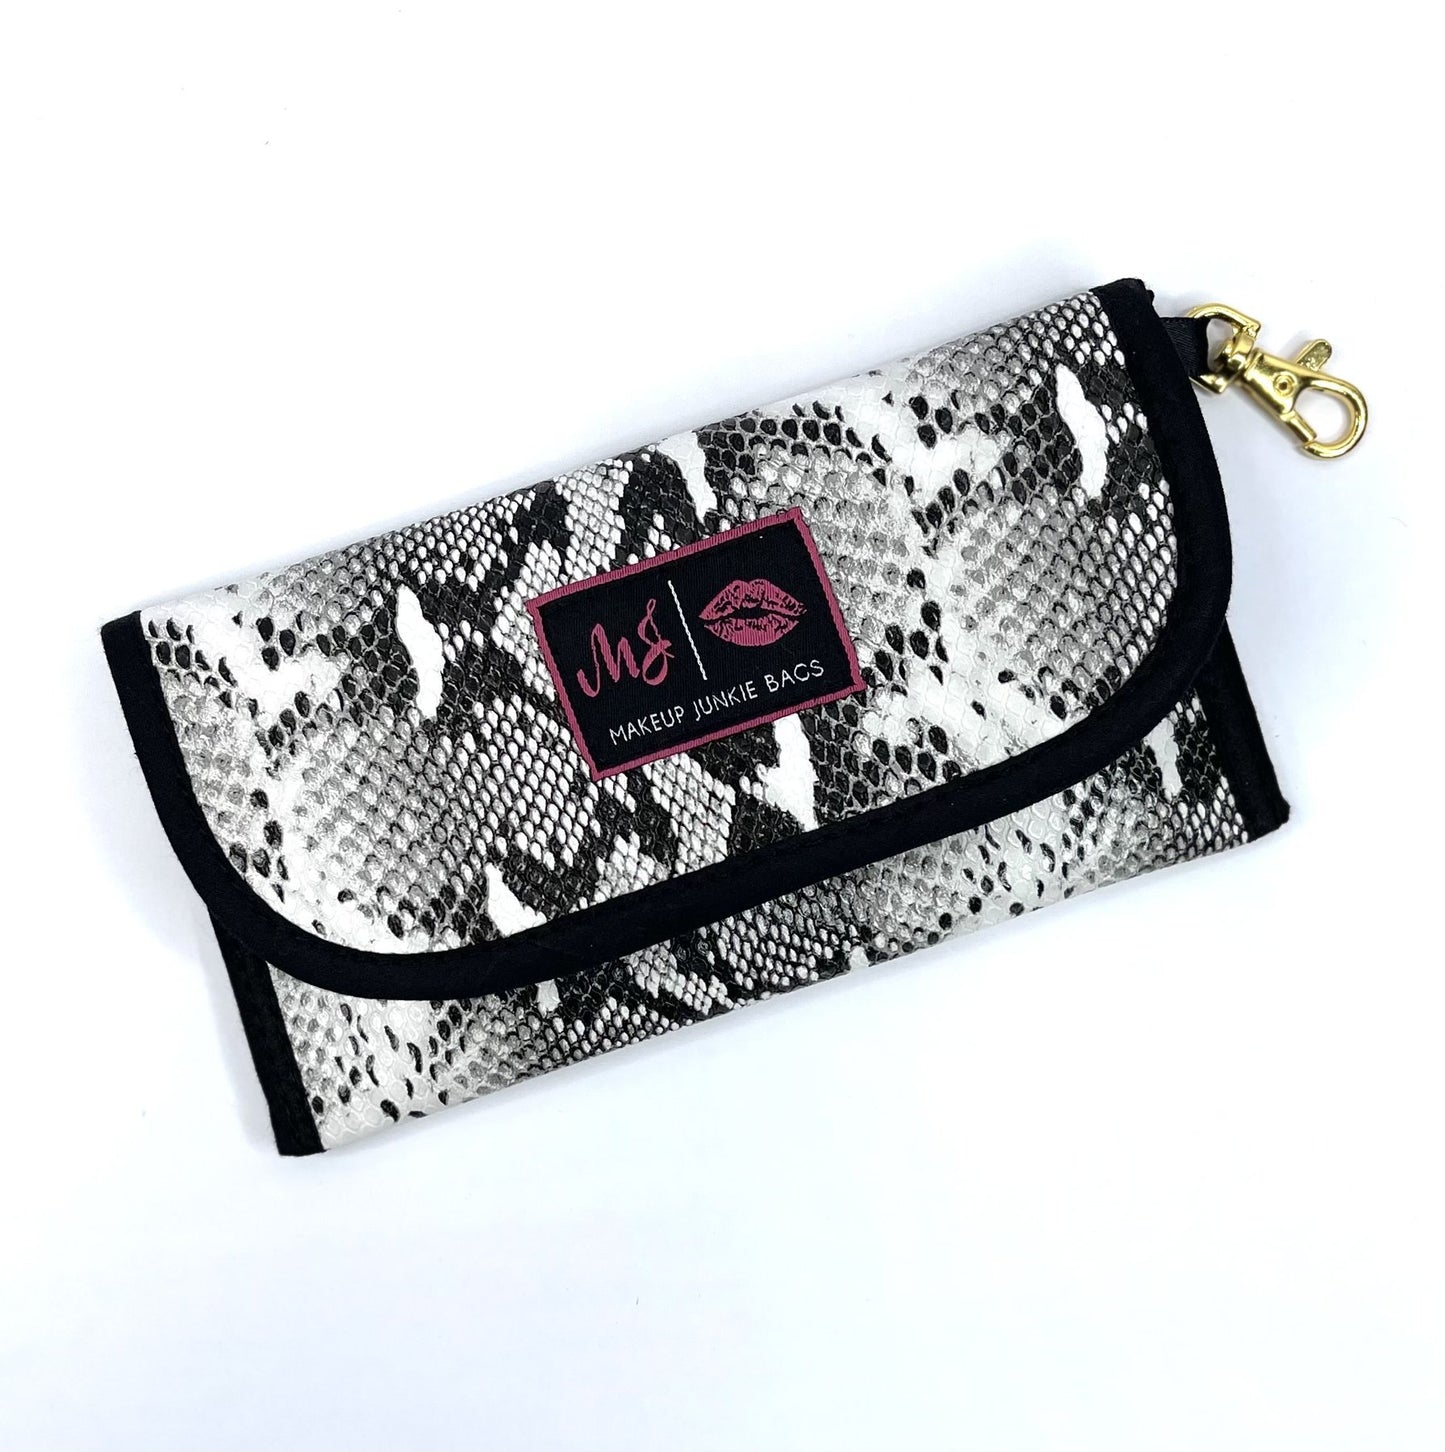 Makeup Junkie Black and White Viper Sunglass Case, Makeup Junkie - A Blissfully Beautiful Boutique